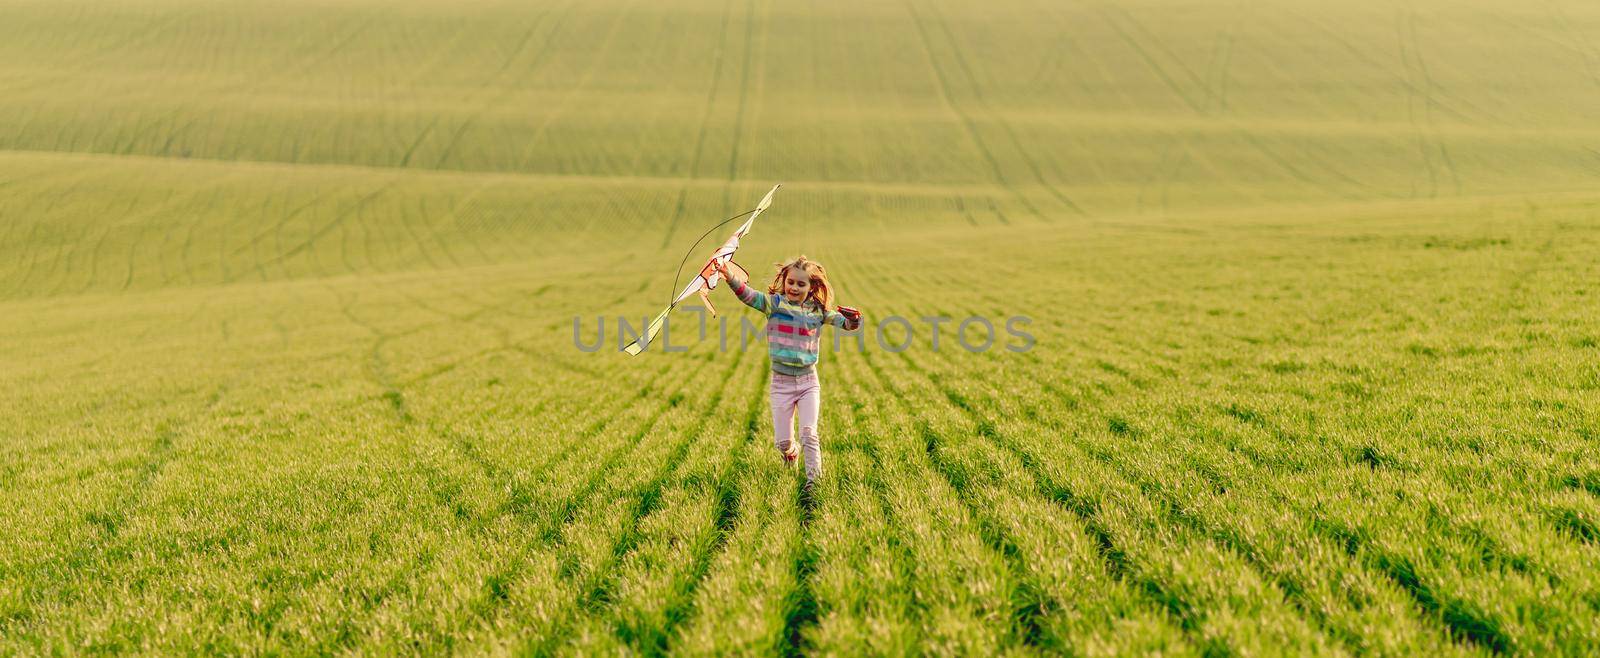 Beautiful little girl playing with kite on juicy green field